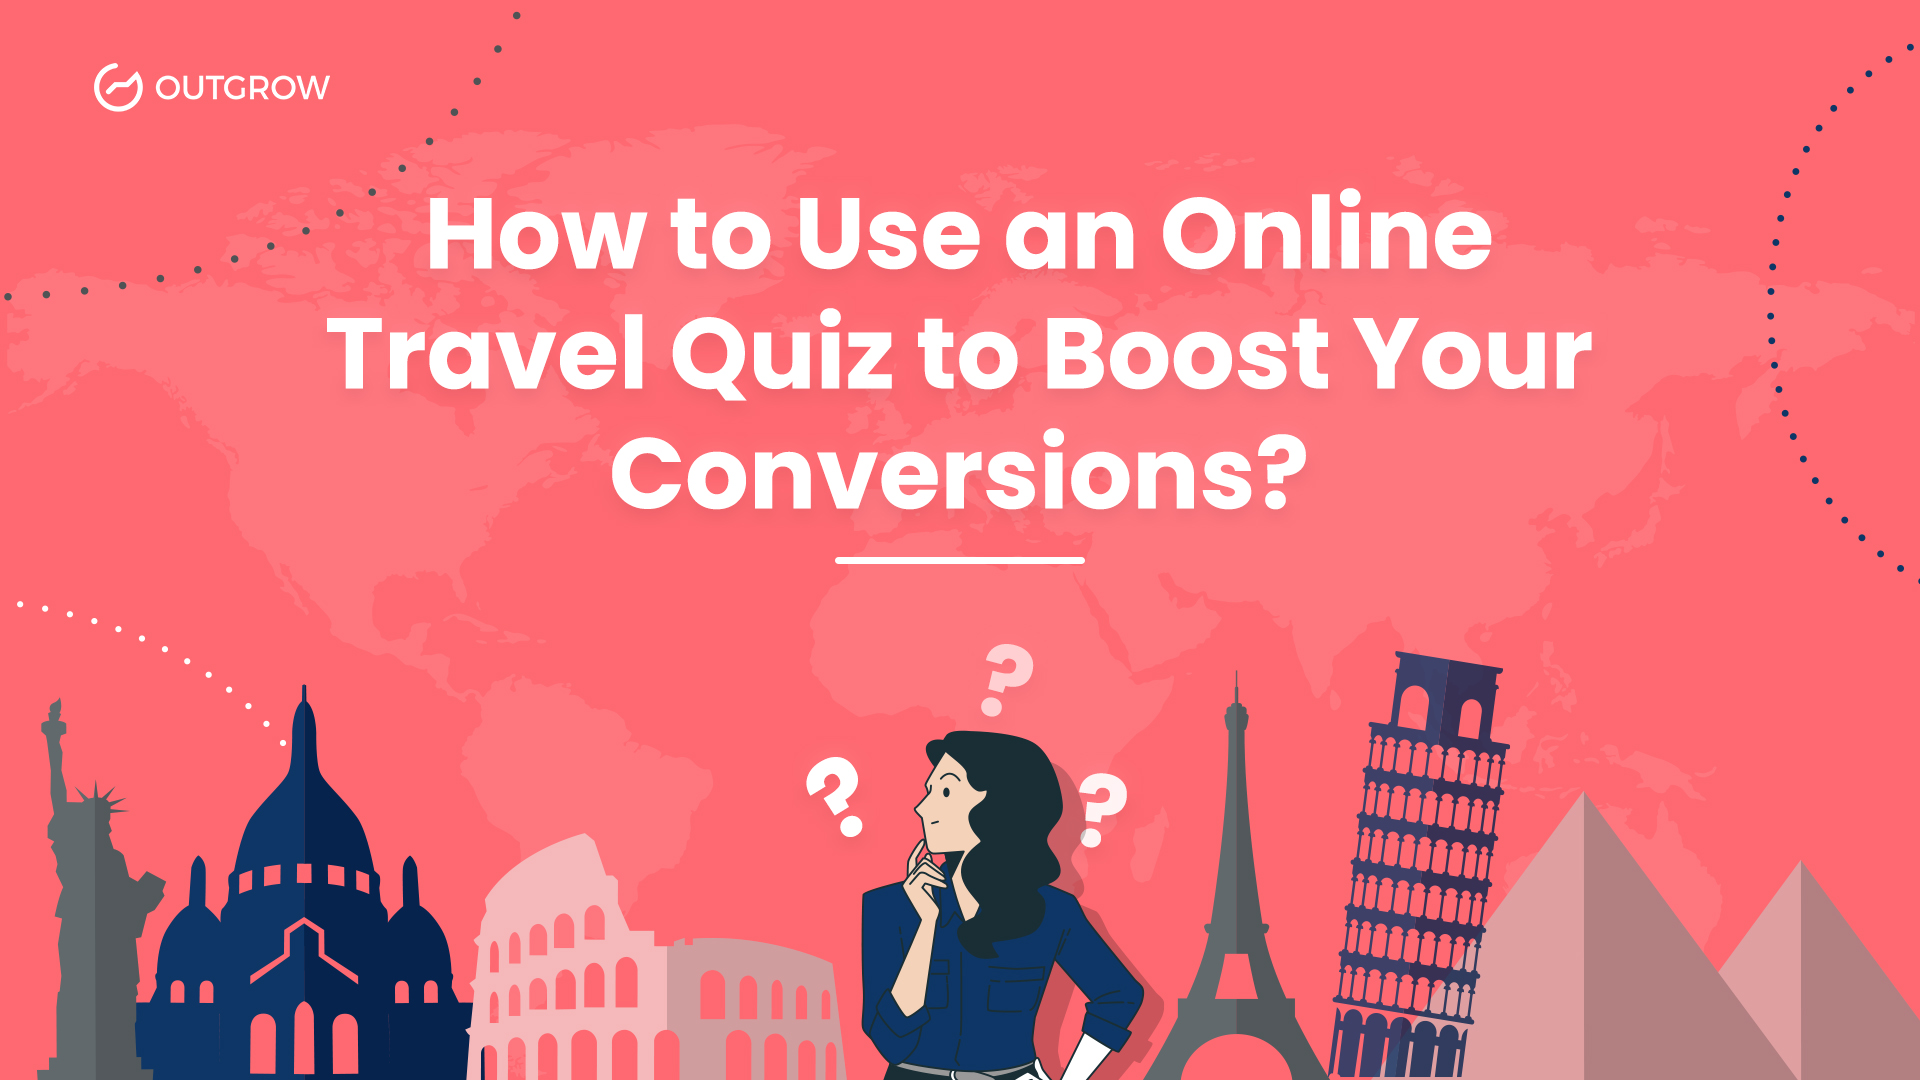 How to Use an Online Travel Quiz to Boost Your Conversion Rate